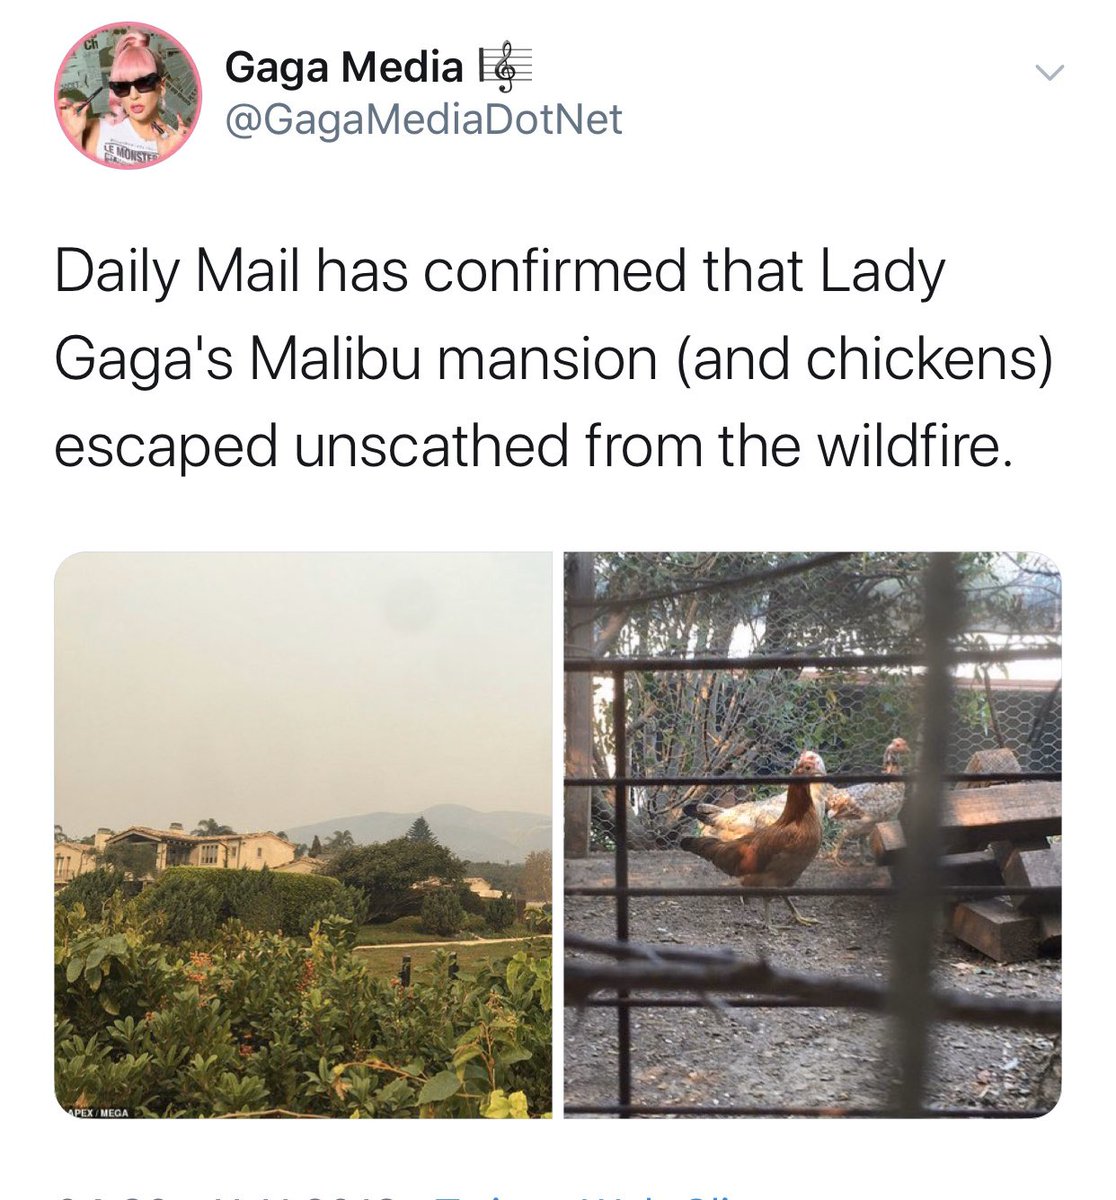 10. lady gaga leaving her chickens behind when evacuating from wildfire